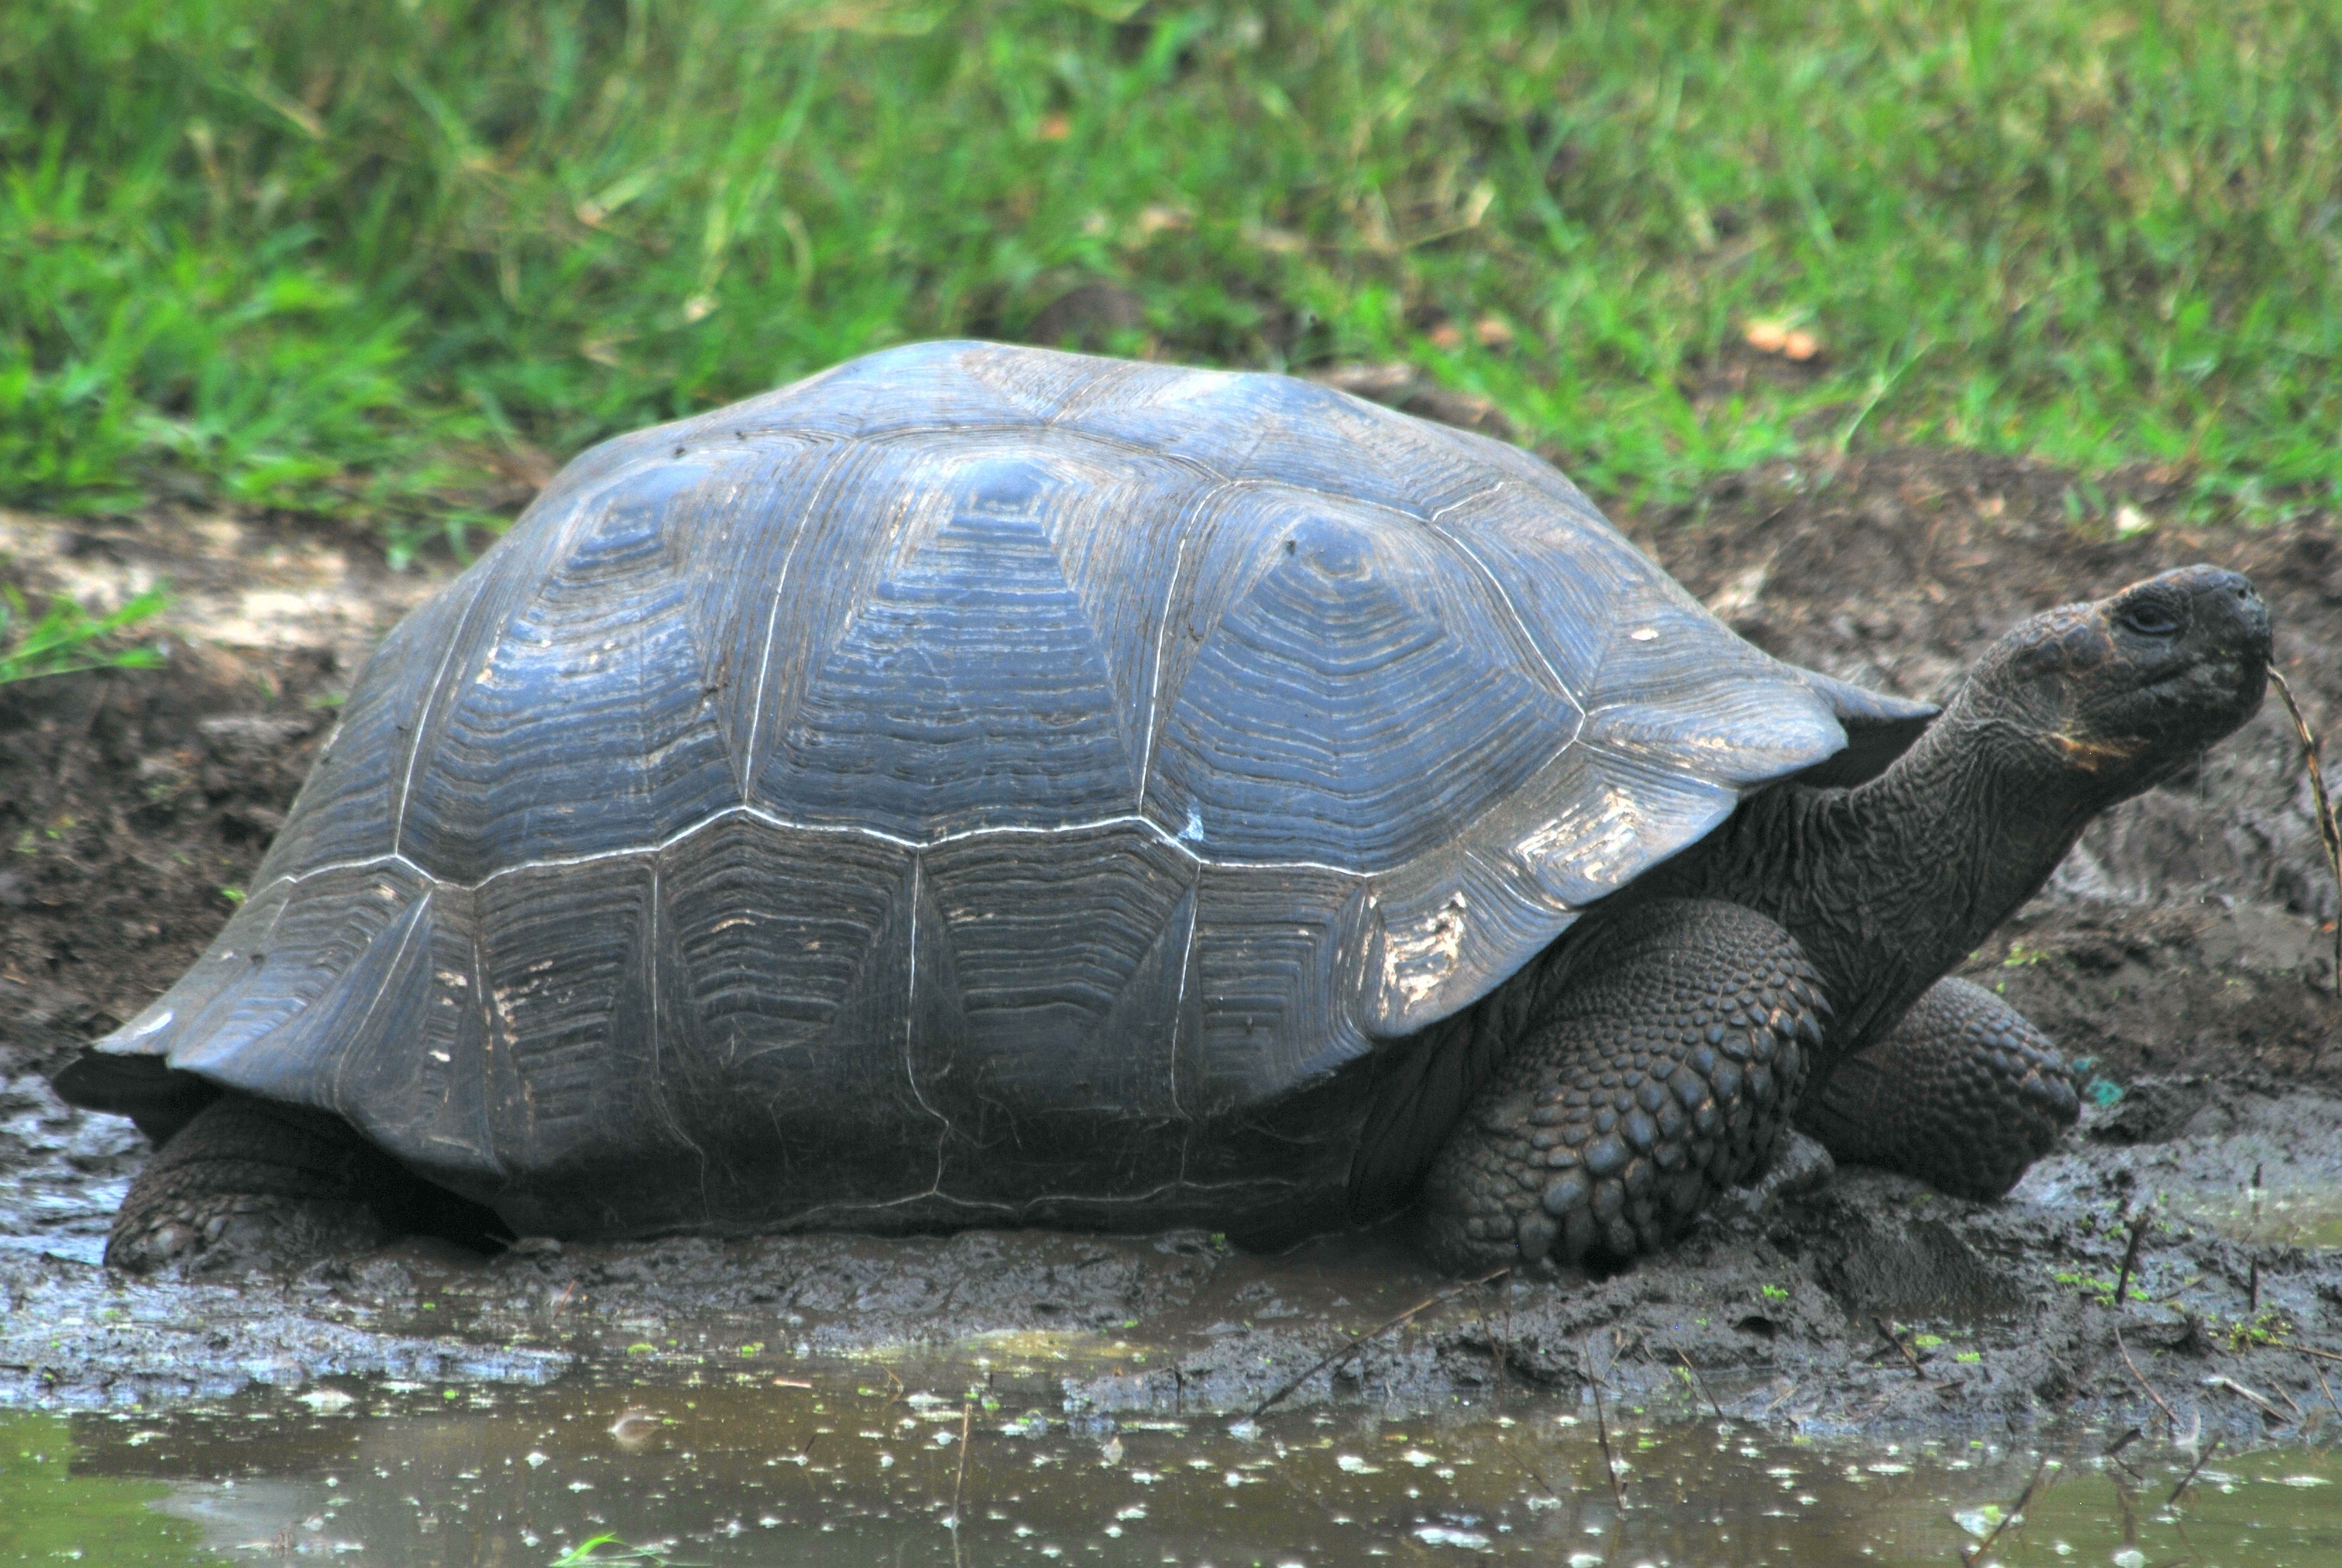 Click picture to see more Galpagos Tortoises.